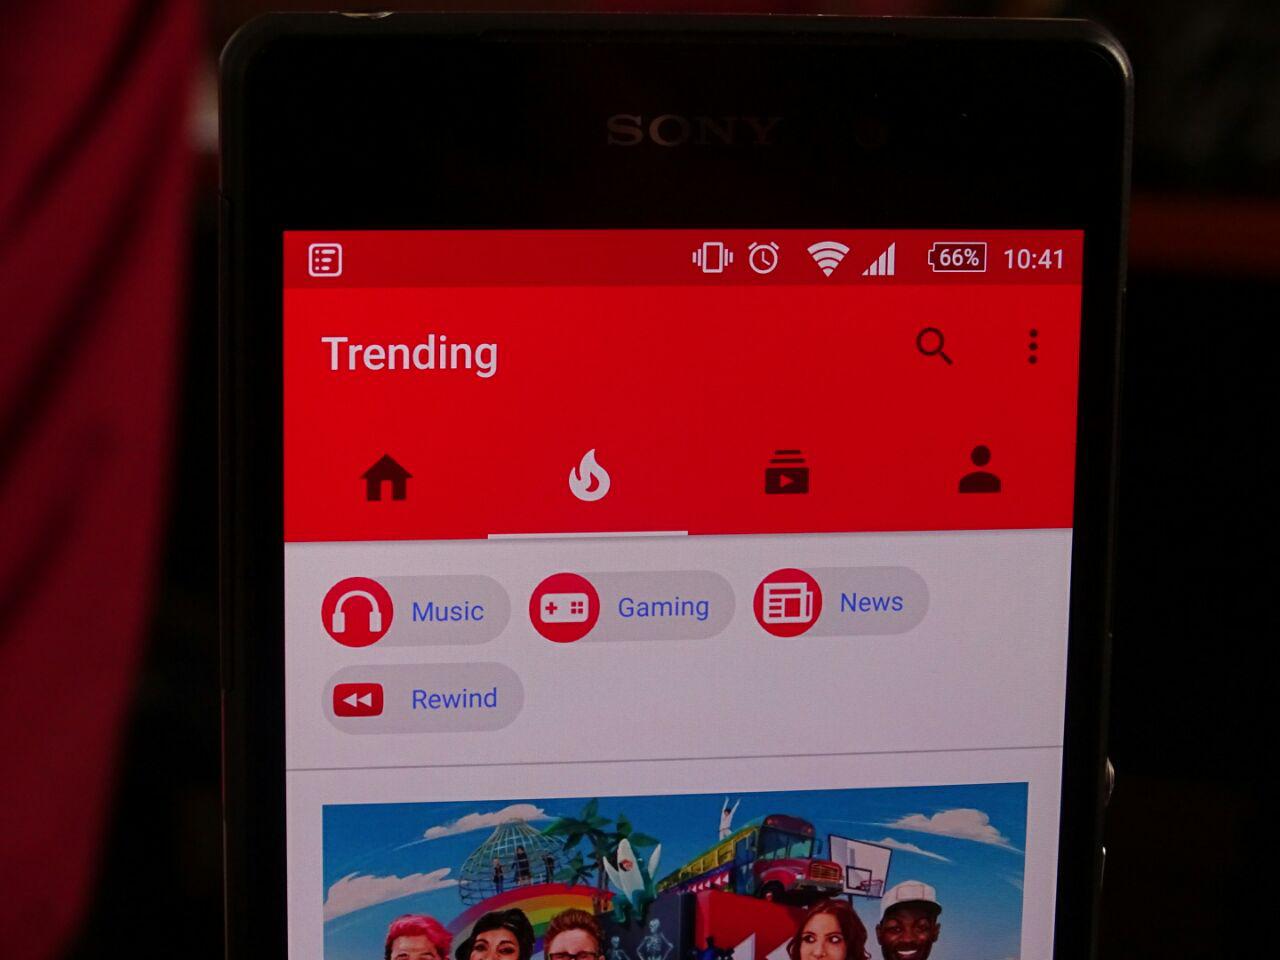 Trends on the YouTube app